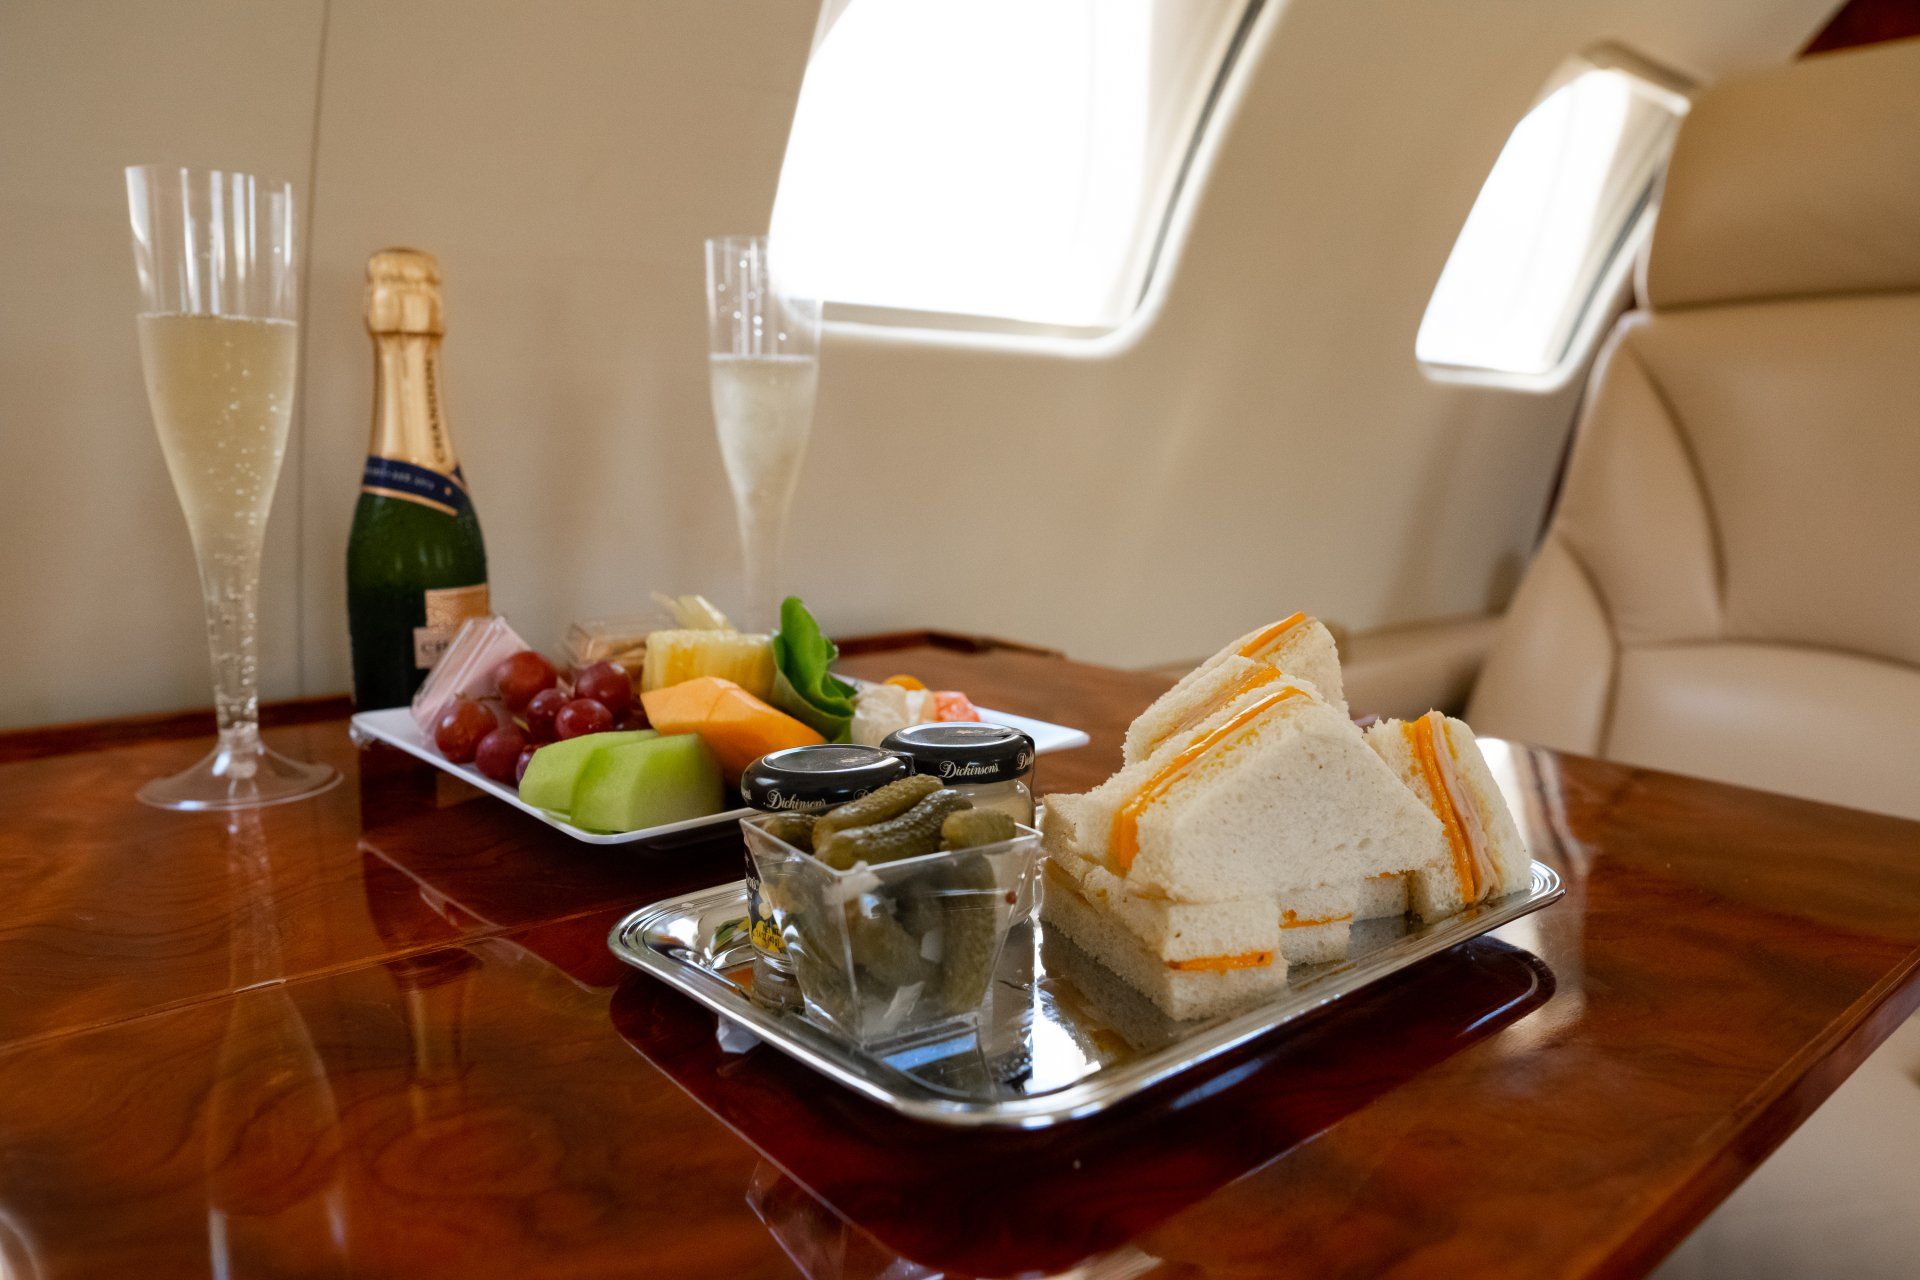 Meal on private jet